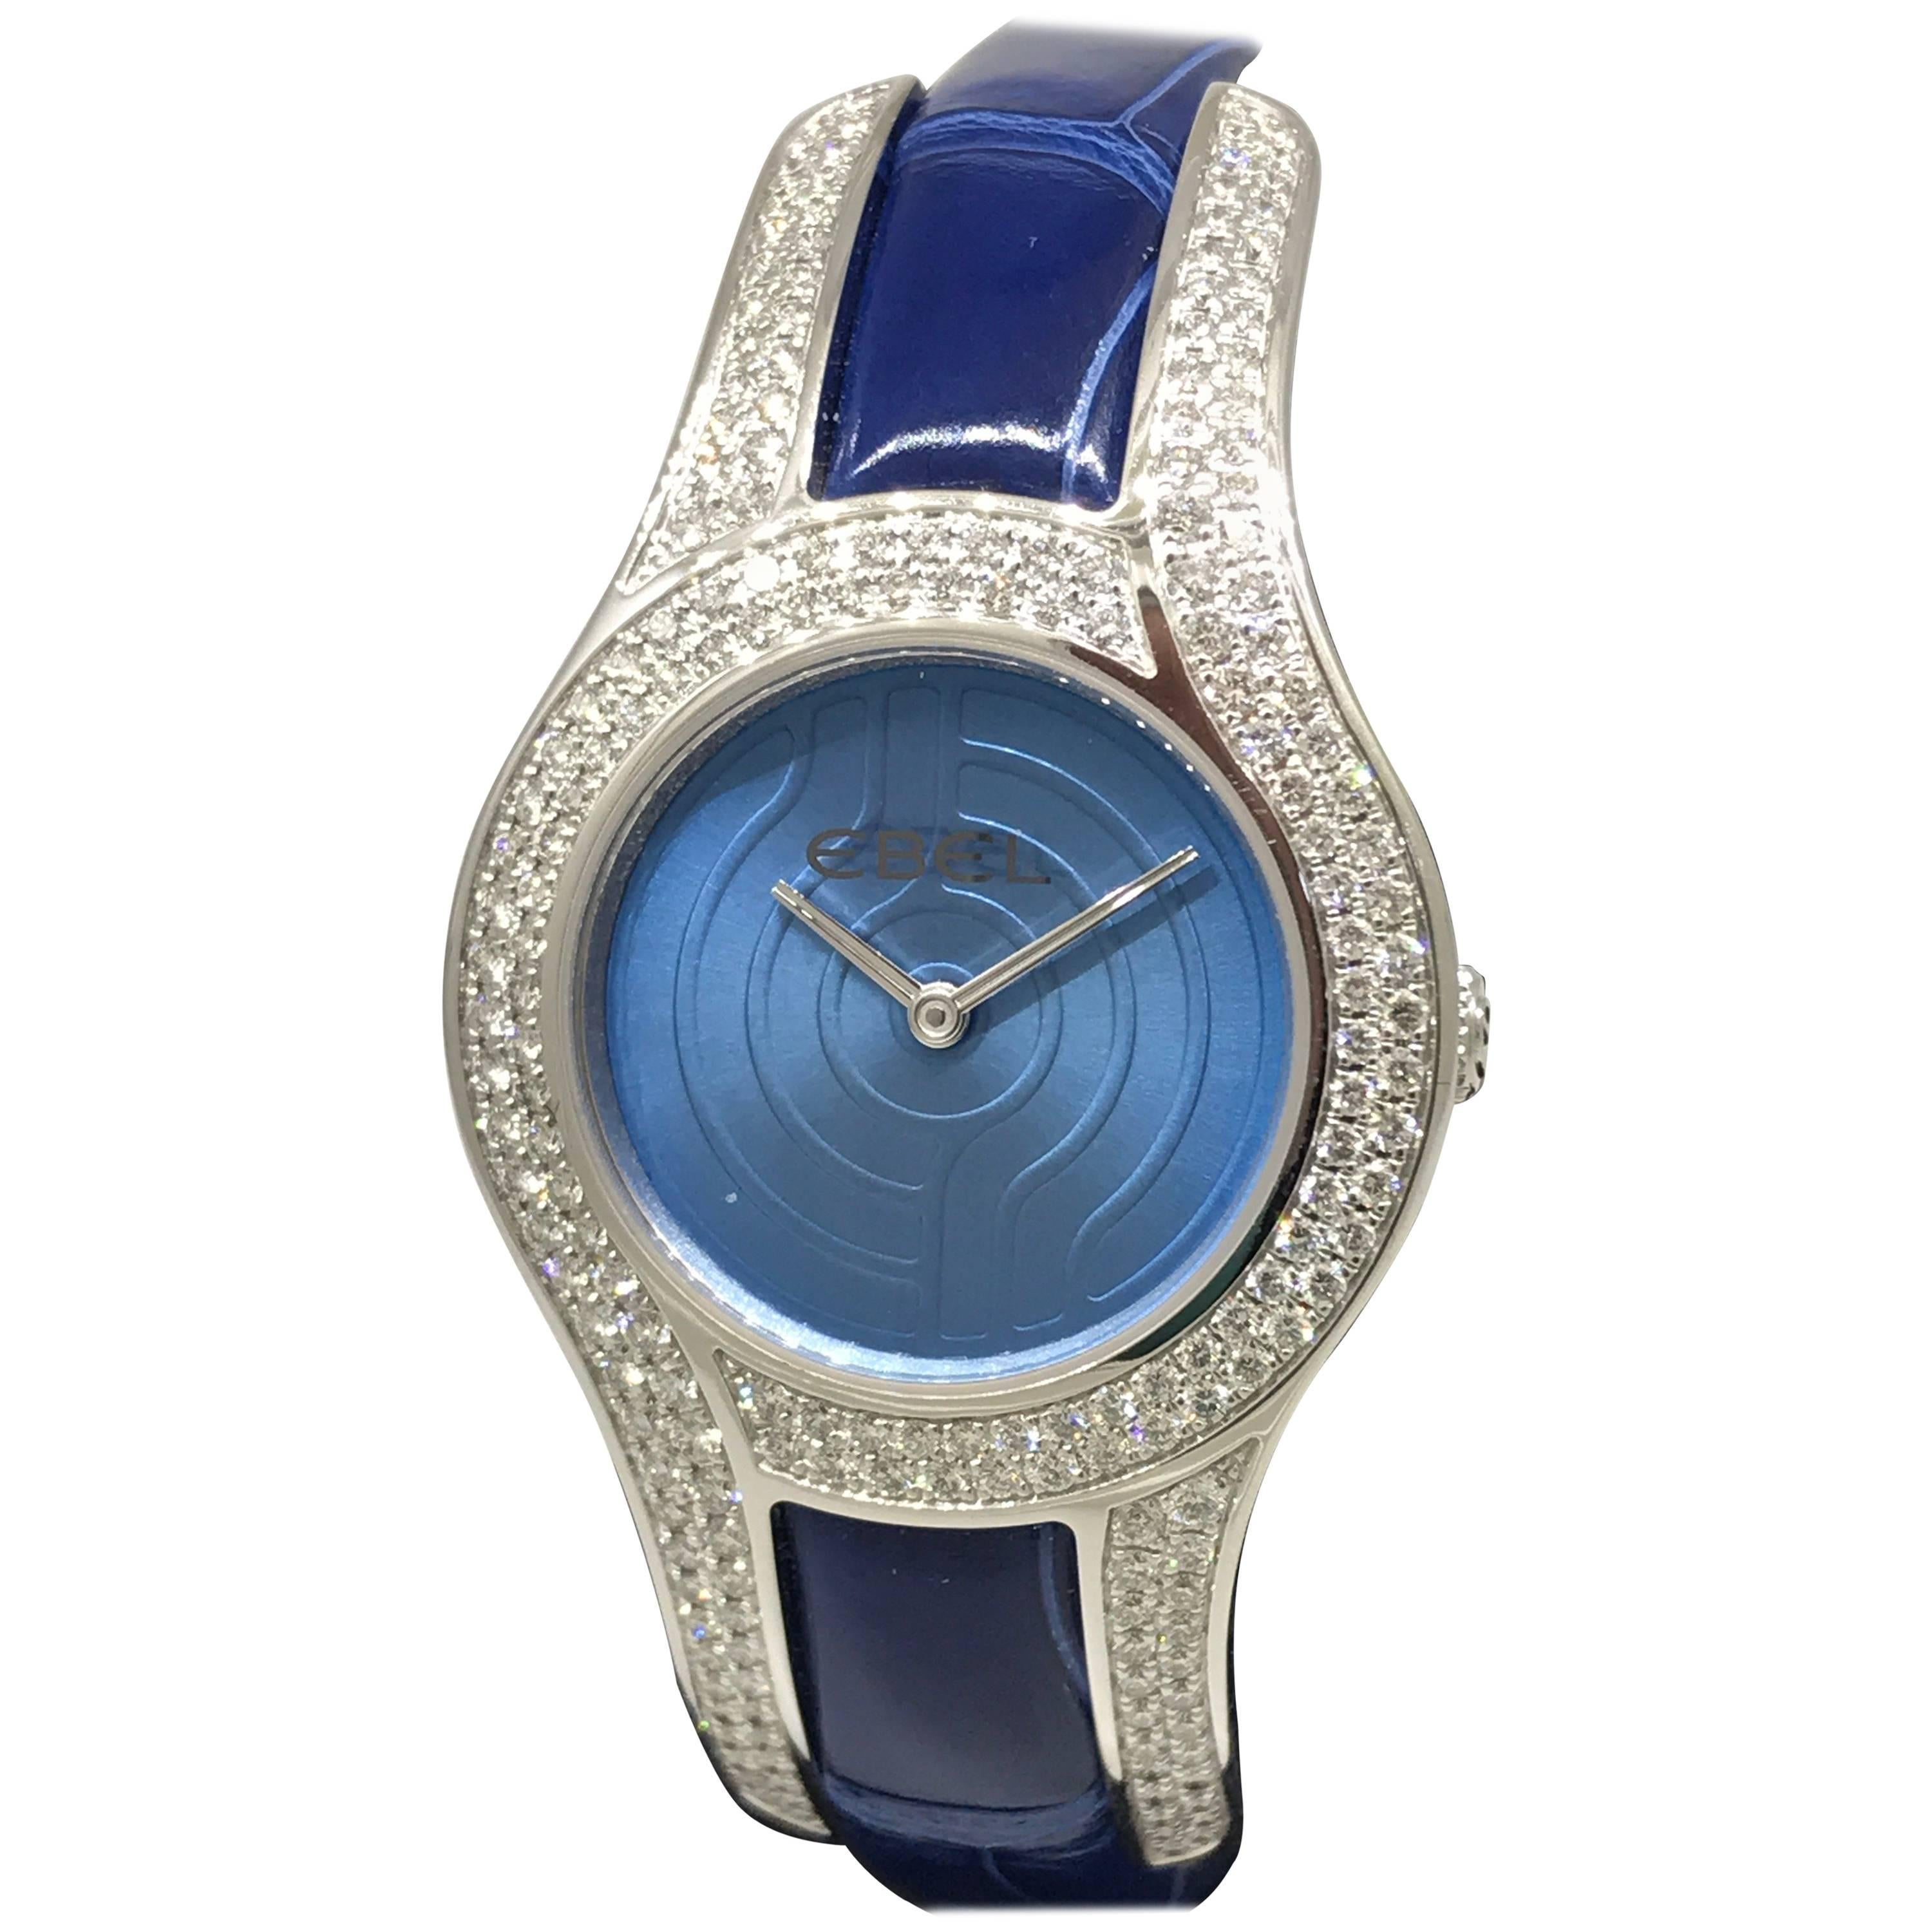 Ebel Midnight Moonchic White Gold Diamond Leather Band Ladies Watch 3157H29 New For Sale